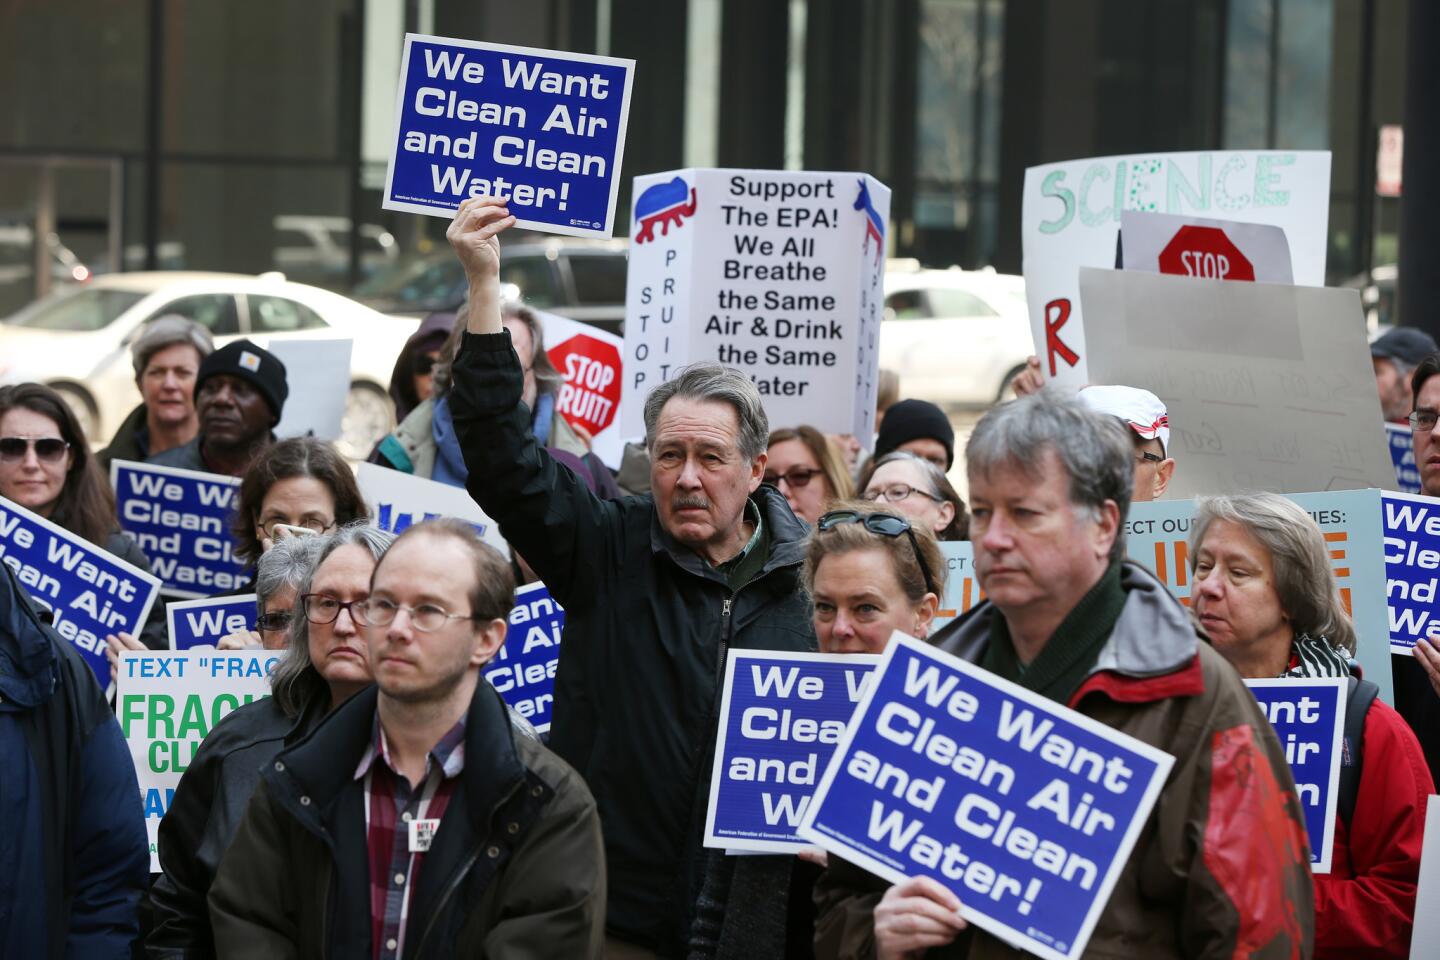 Larry Hoellwarth, center, joins Environmental Protection Agency staffers rallying in Federal Plaza in Chicago on Monday, Feb. 6, 2017, against the nomination of Scott Pruitt as agency head.